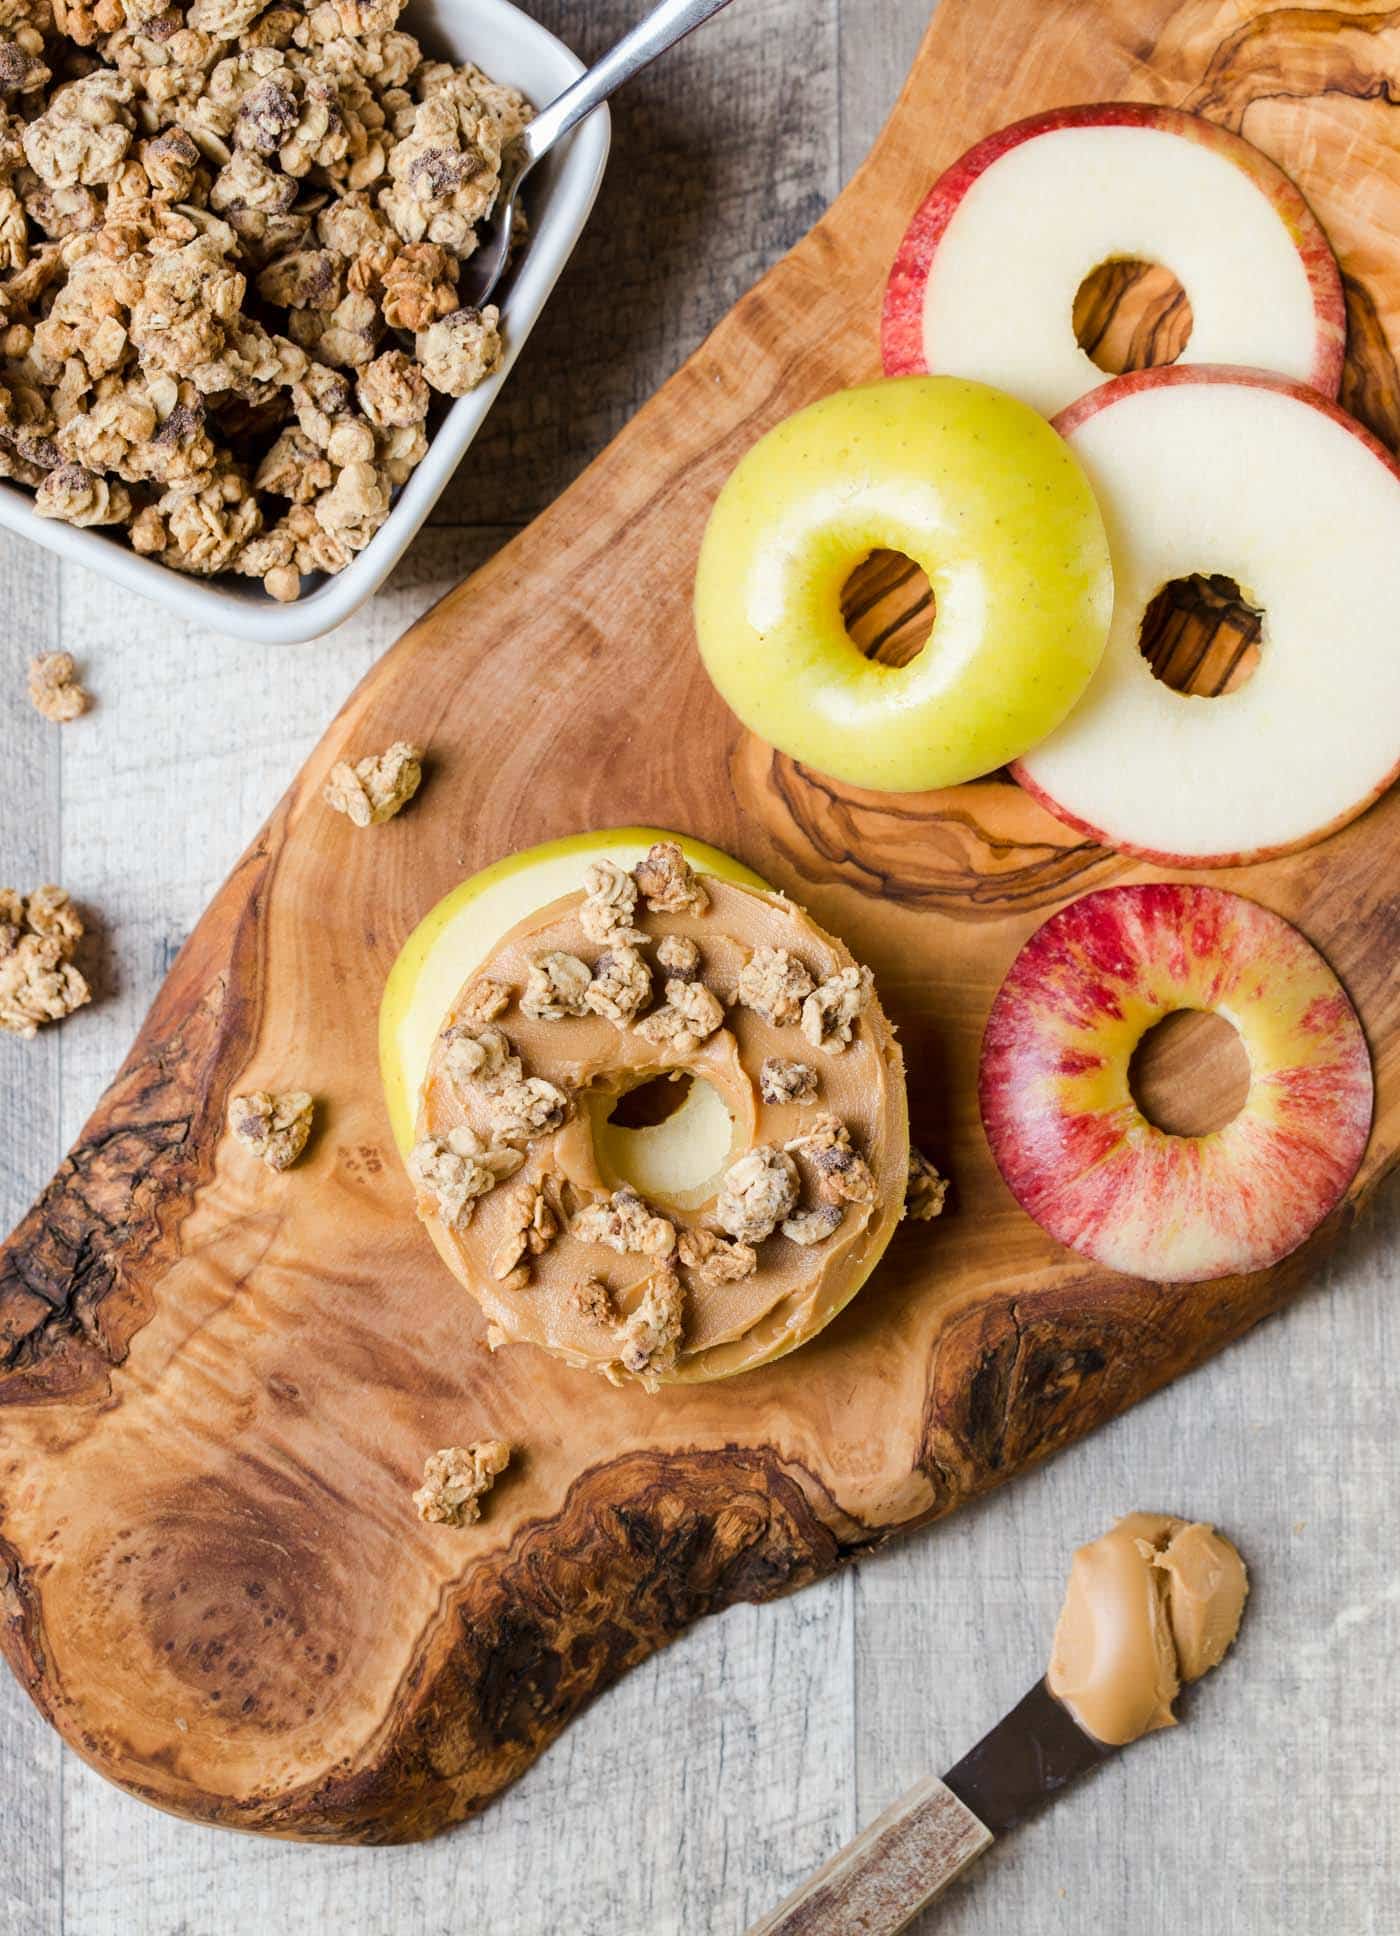 Apple Sandwiches with Almond Butter and Granola - Garnish with Lemon